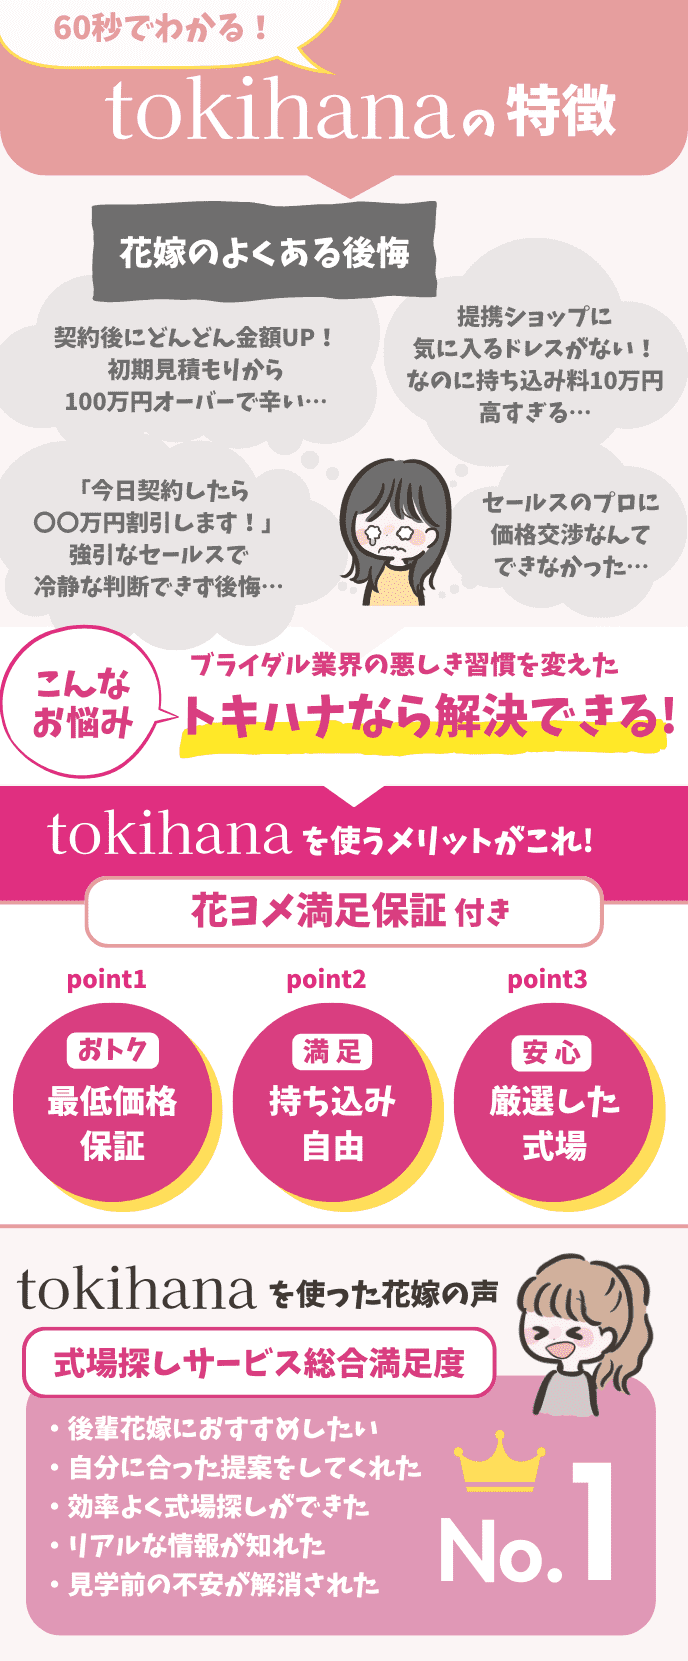 An illustration of the characteristics of Tokihana that can be understood in 1 minute